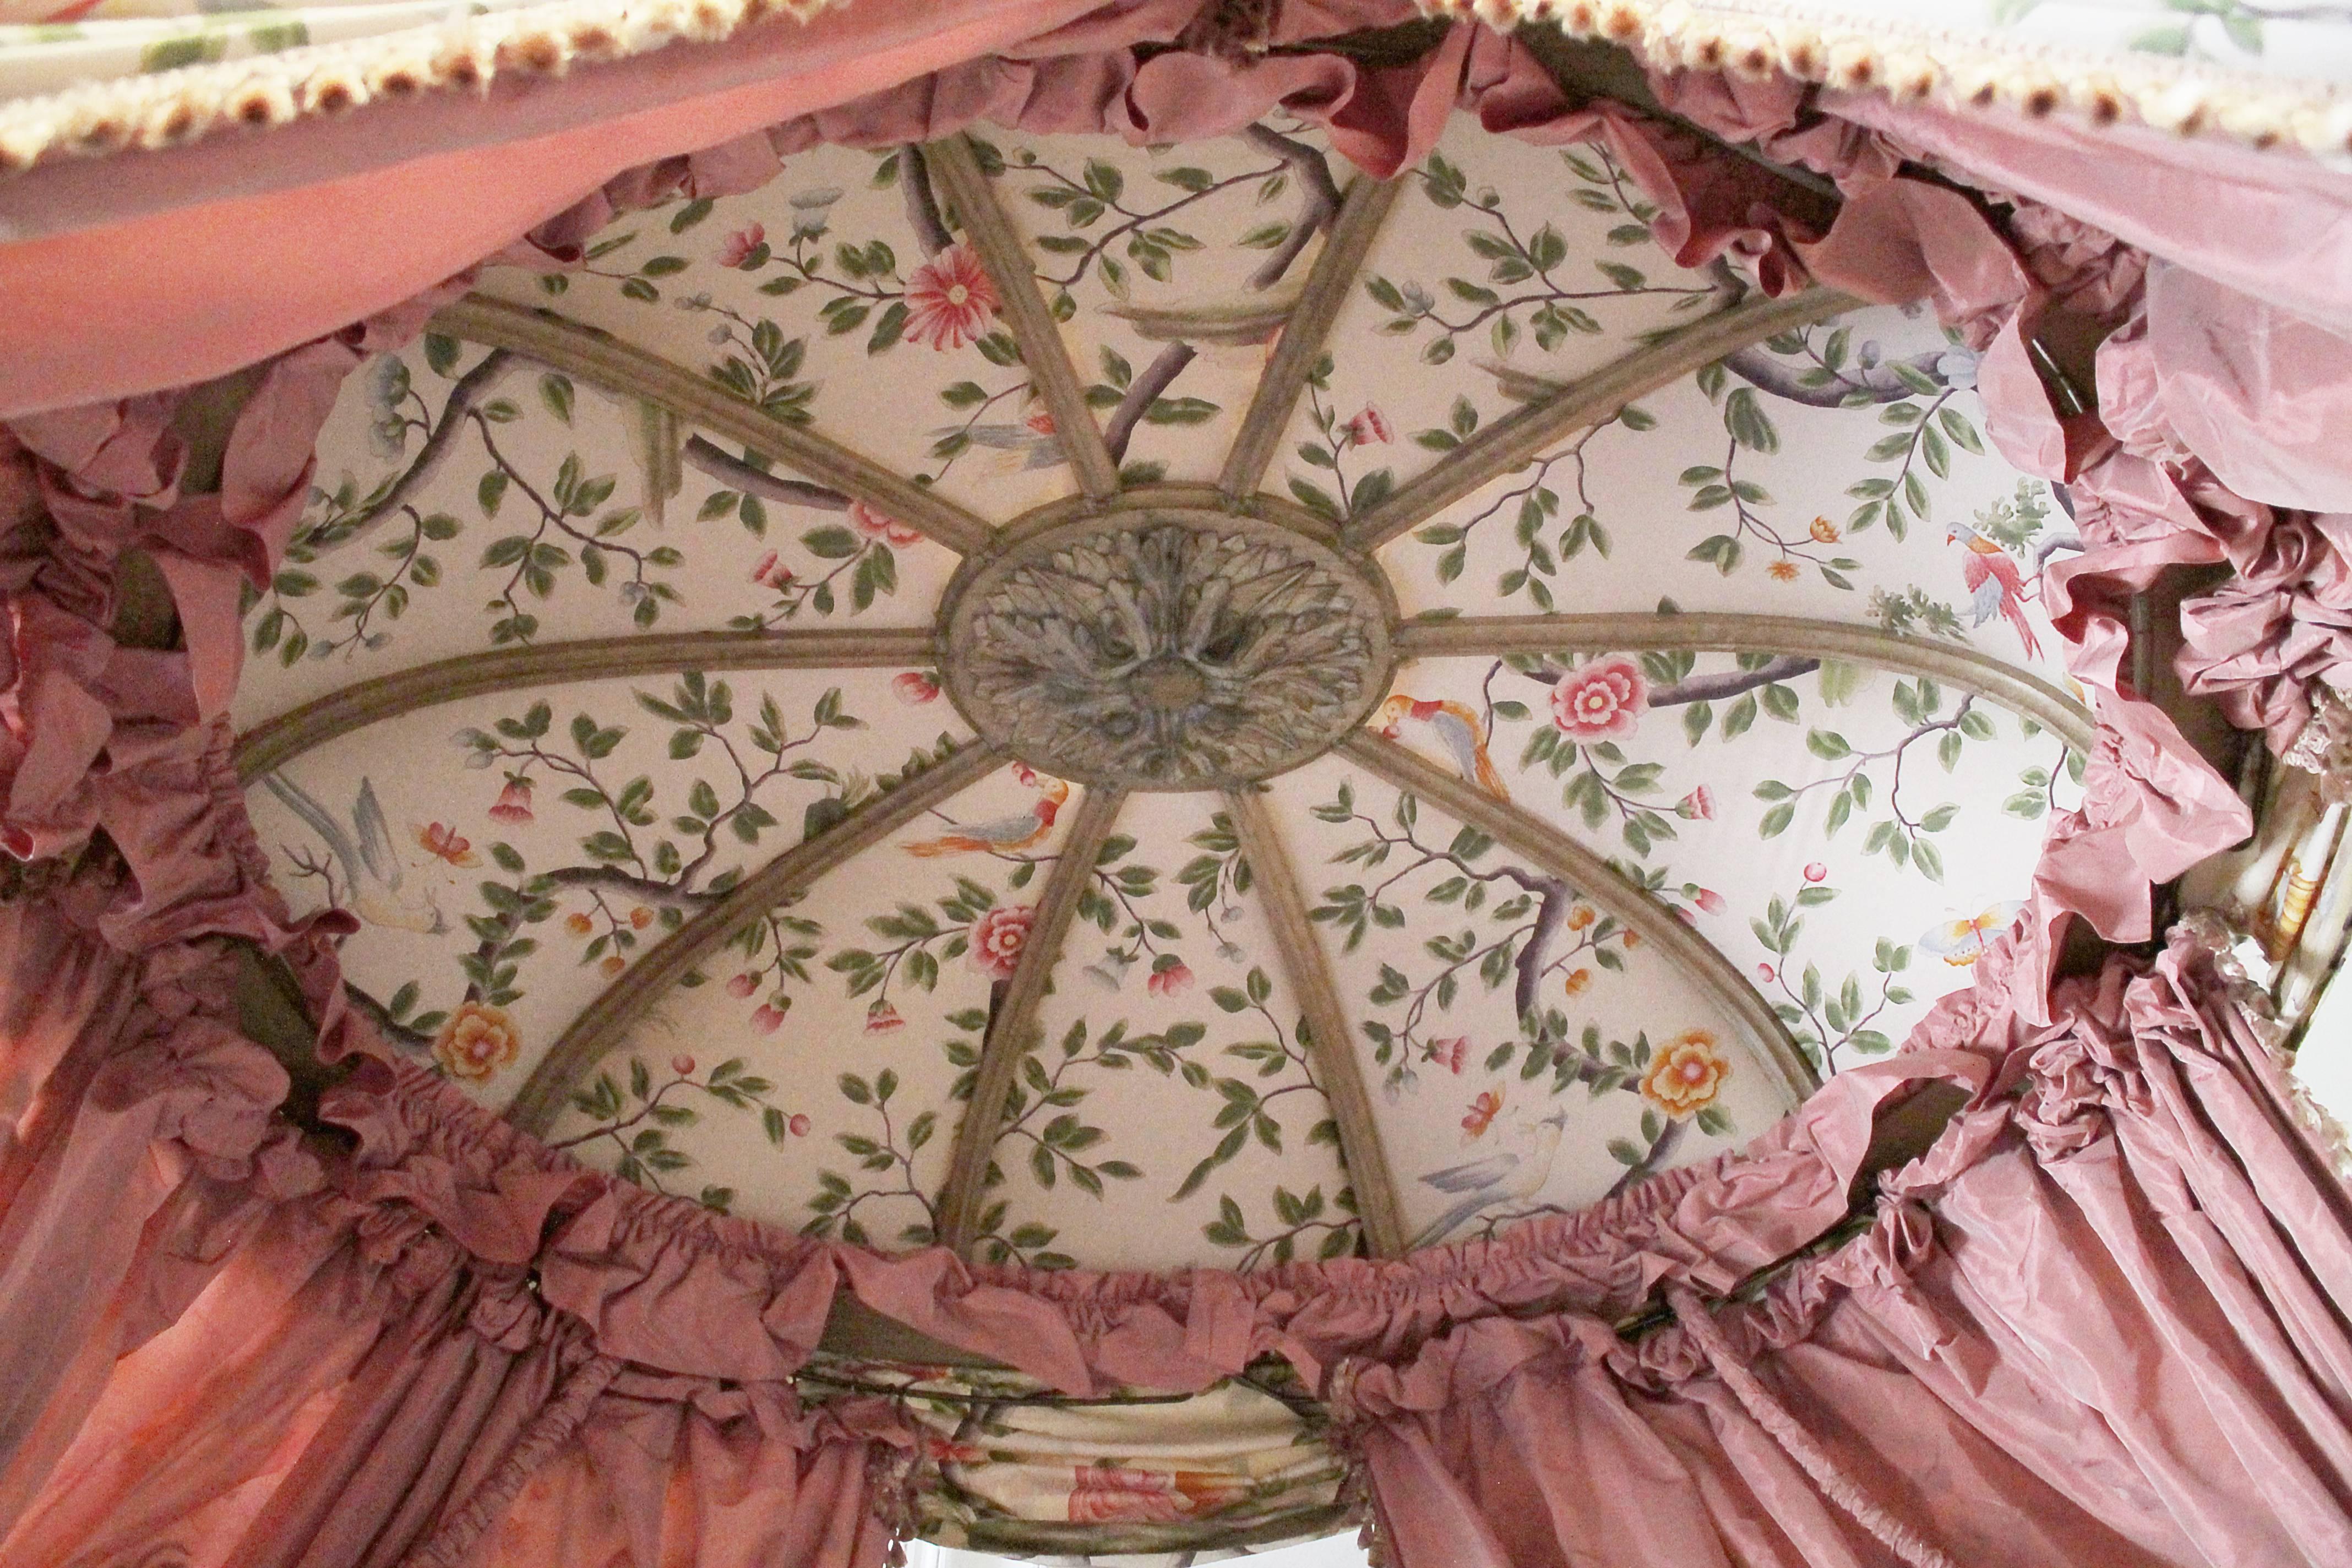 18th century French canopy daybed with toile upholstery
European canopy bed hand carved in the Louis XVI style upholstered in an asian toile
Background color is cream with hues of reds, pinks, greens and gold. Inside of the curtains are a pink